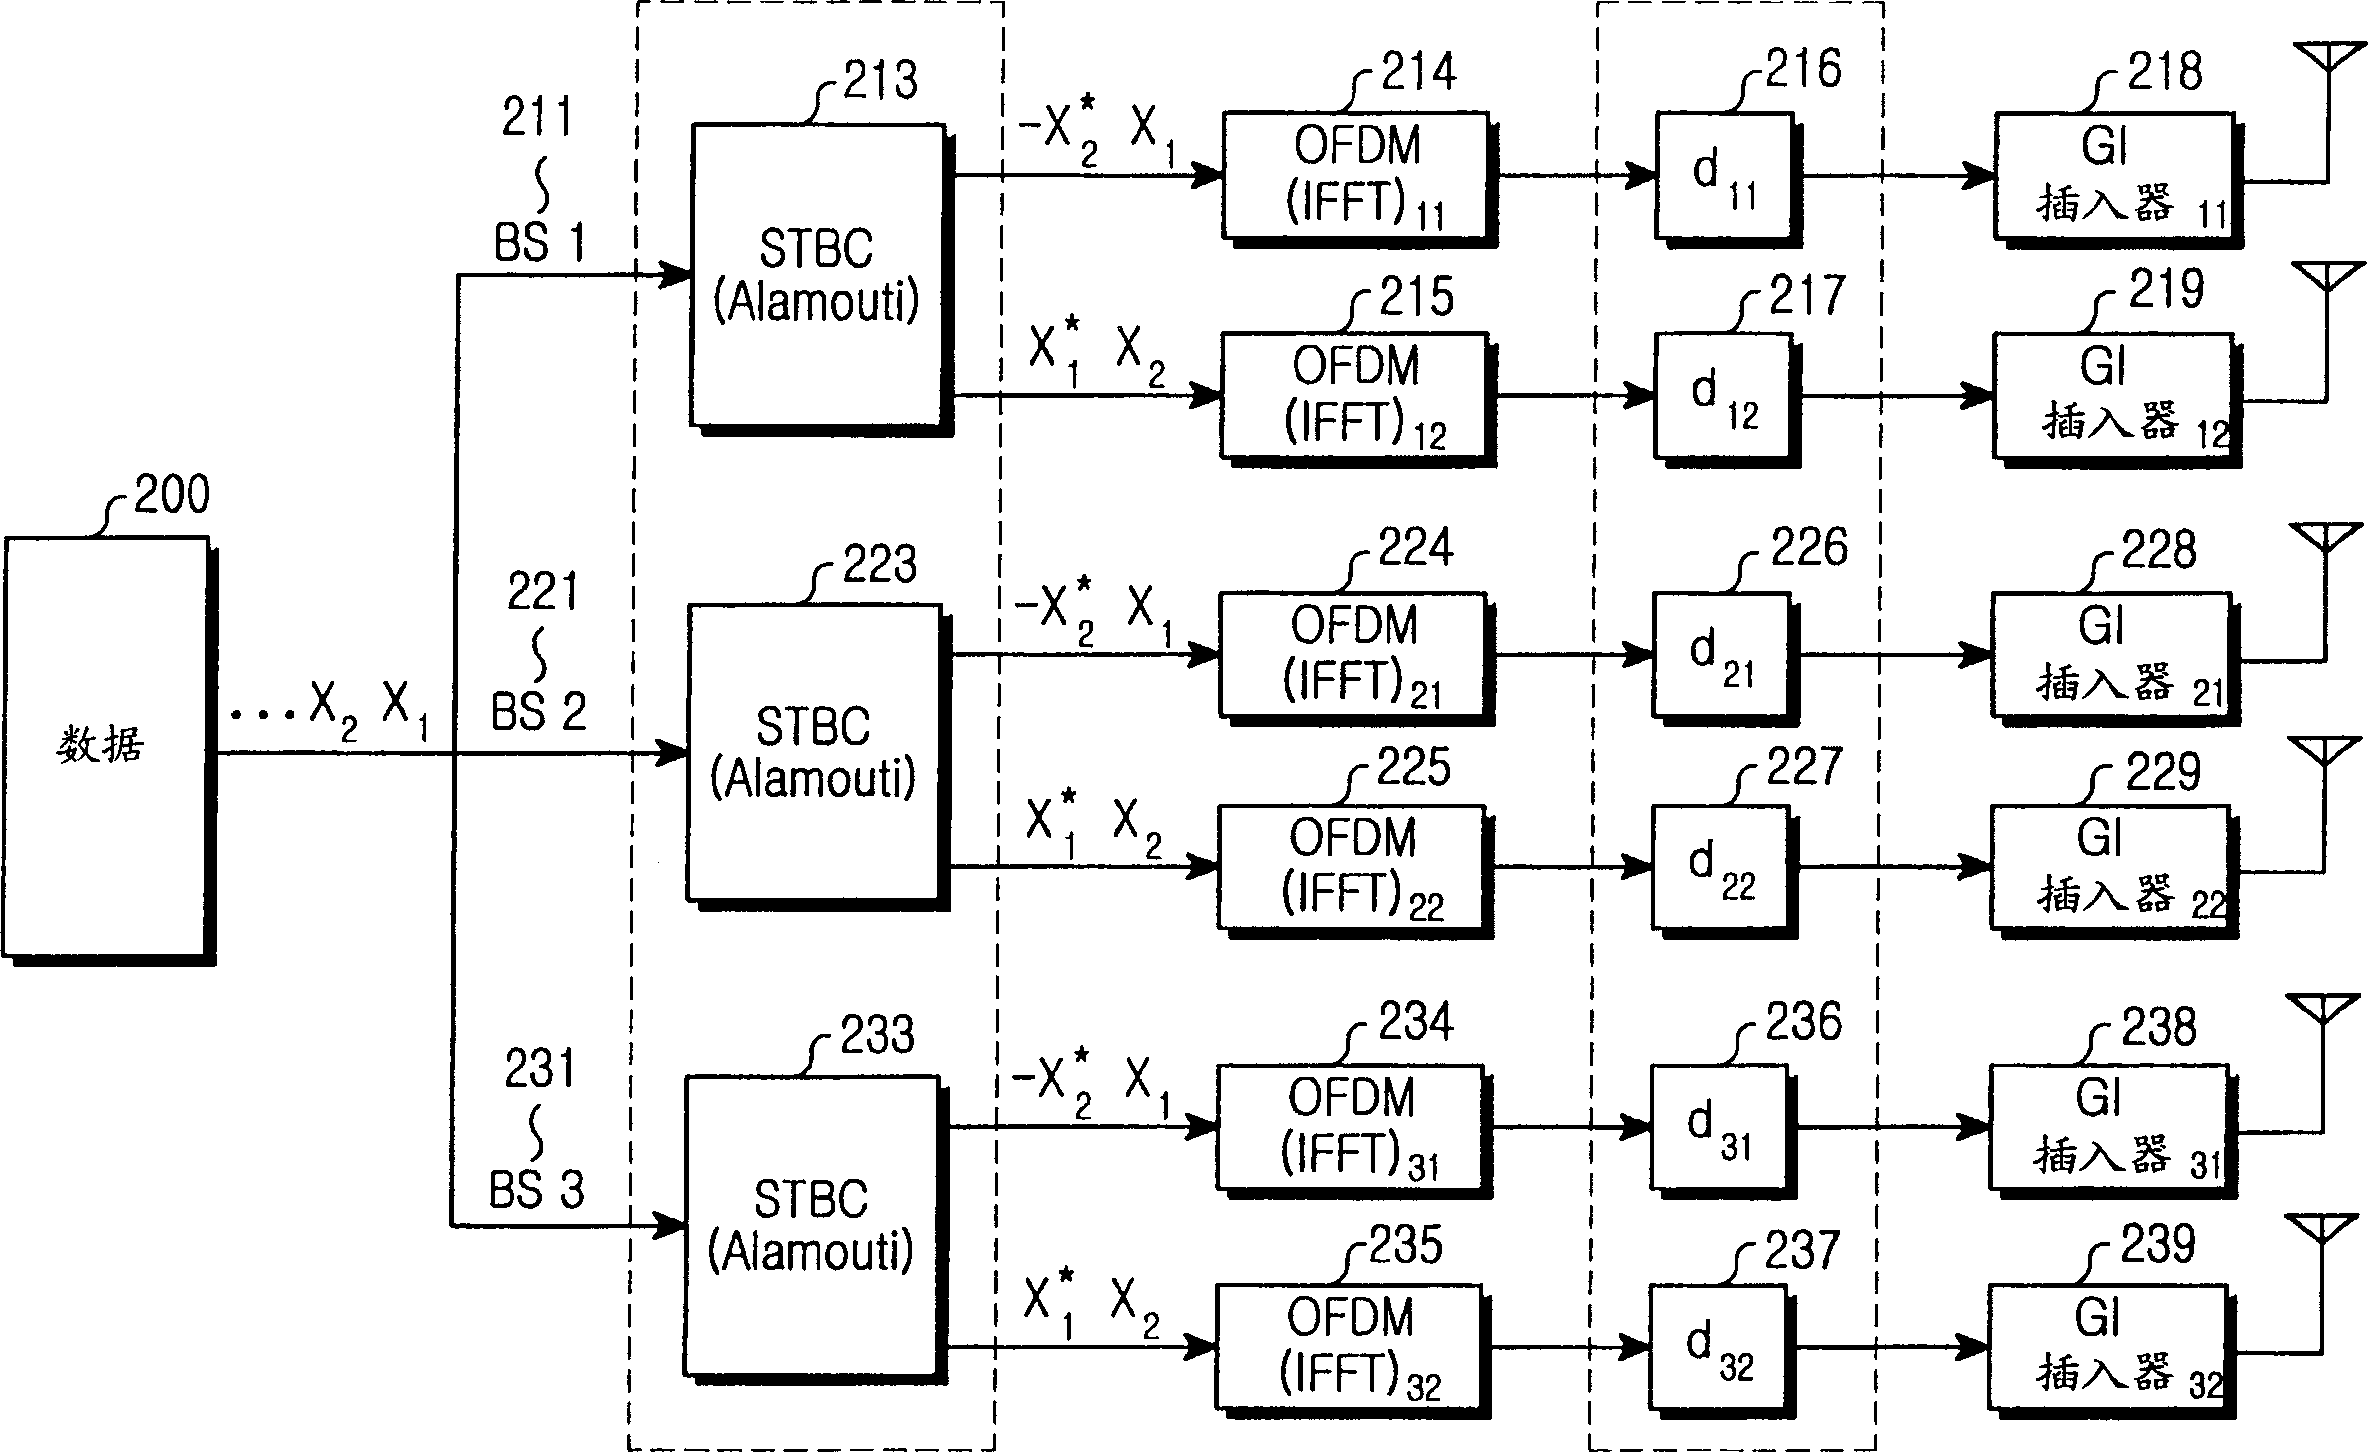 Transmission apparatus and method for a base station using block coding and cyclic delay diversity techniques in an OFDM mobile communication system